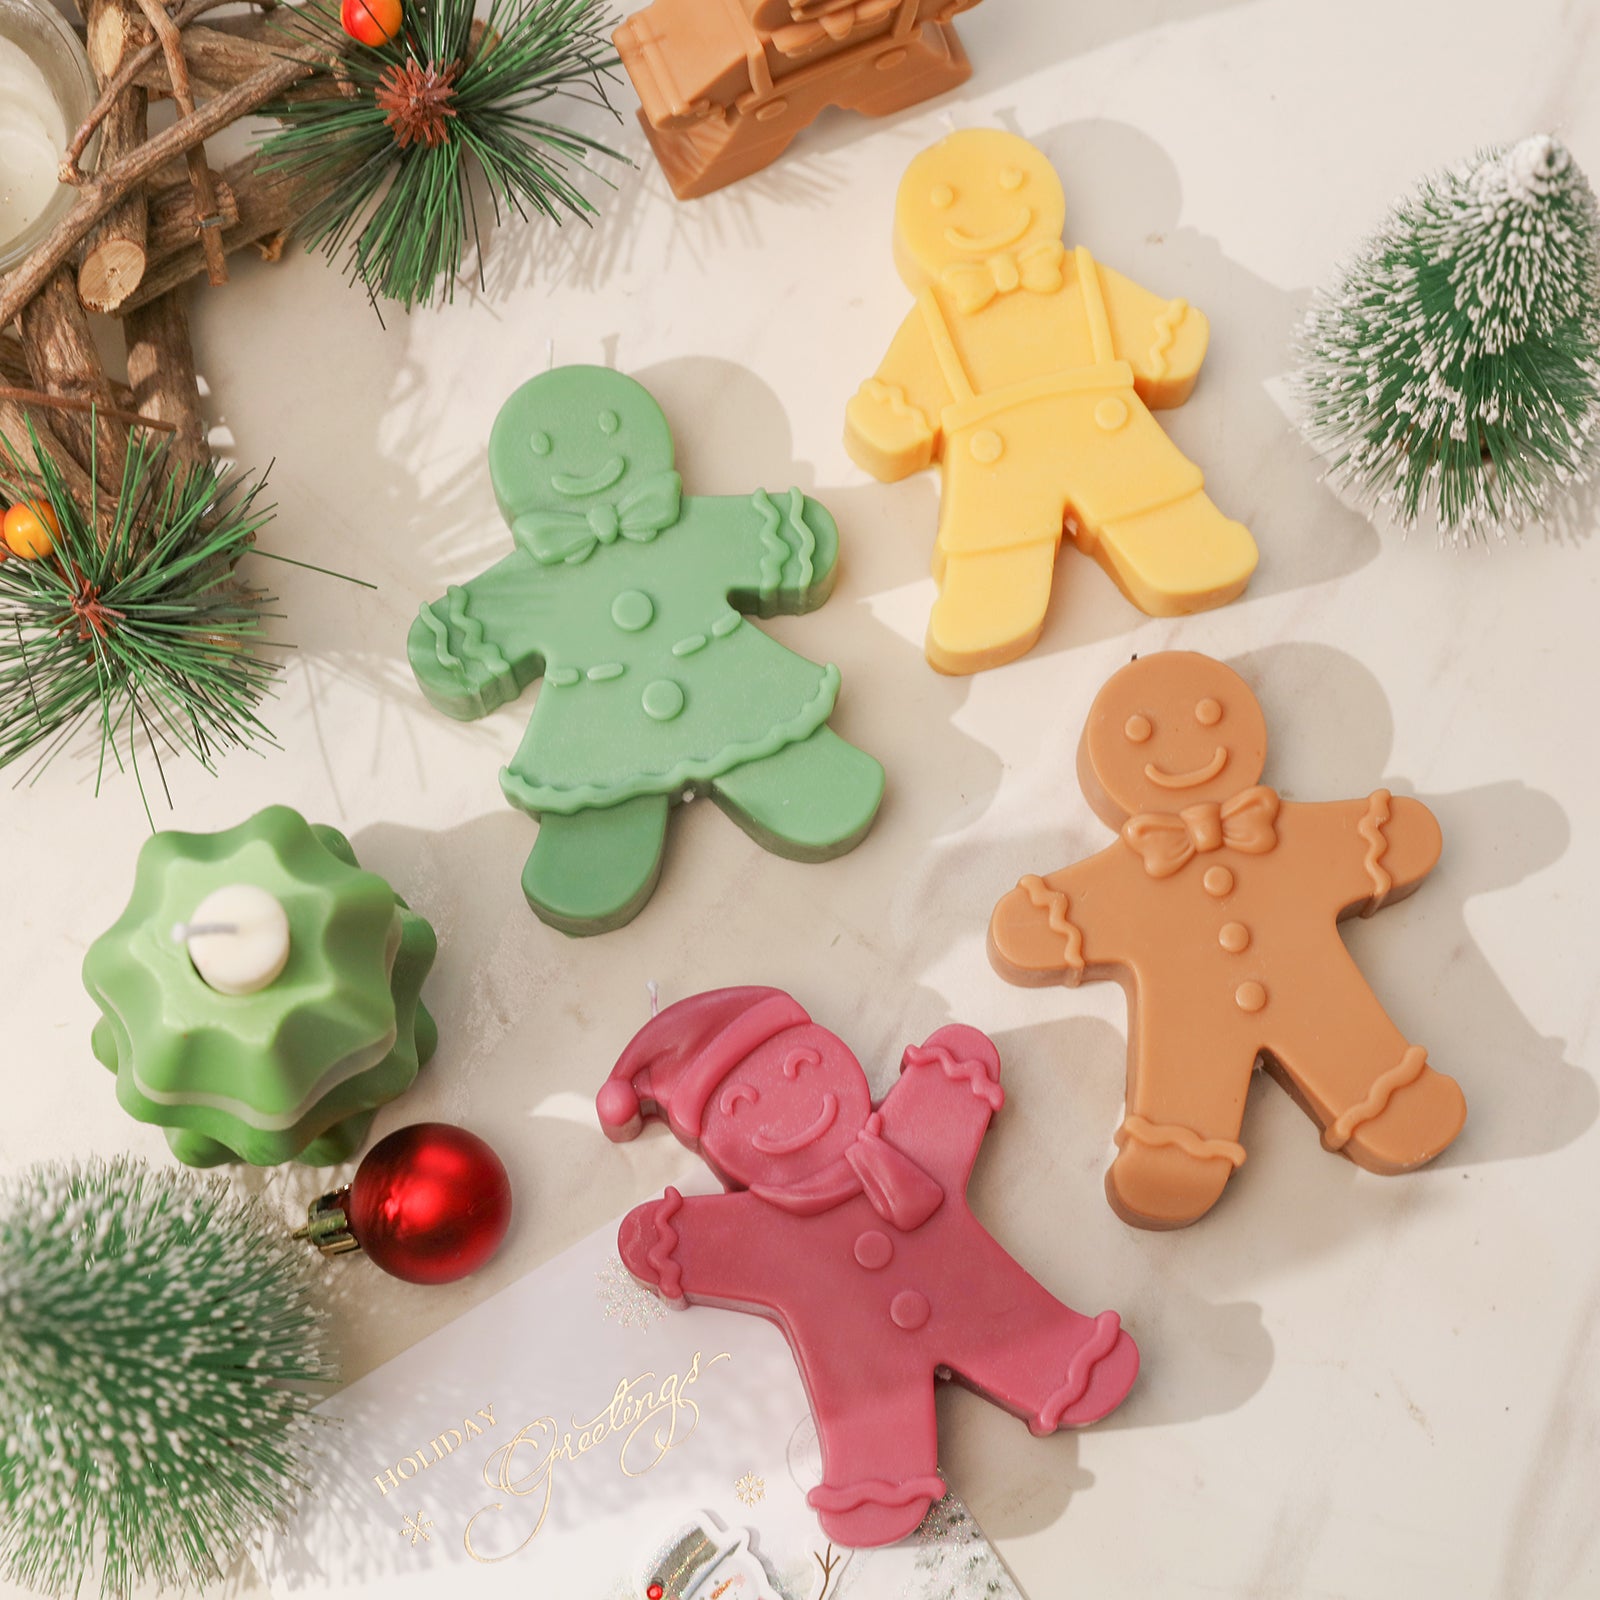 Christmas Gingerbread Man and House Mold - Food-Grade Silicone